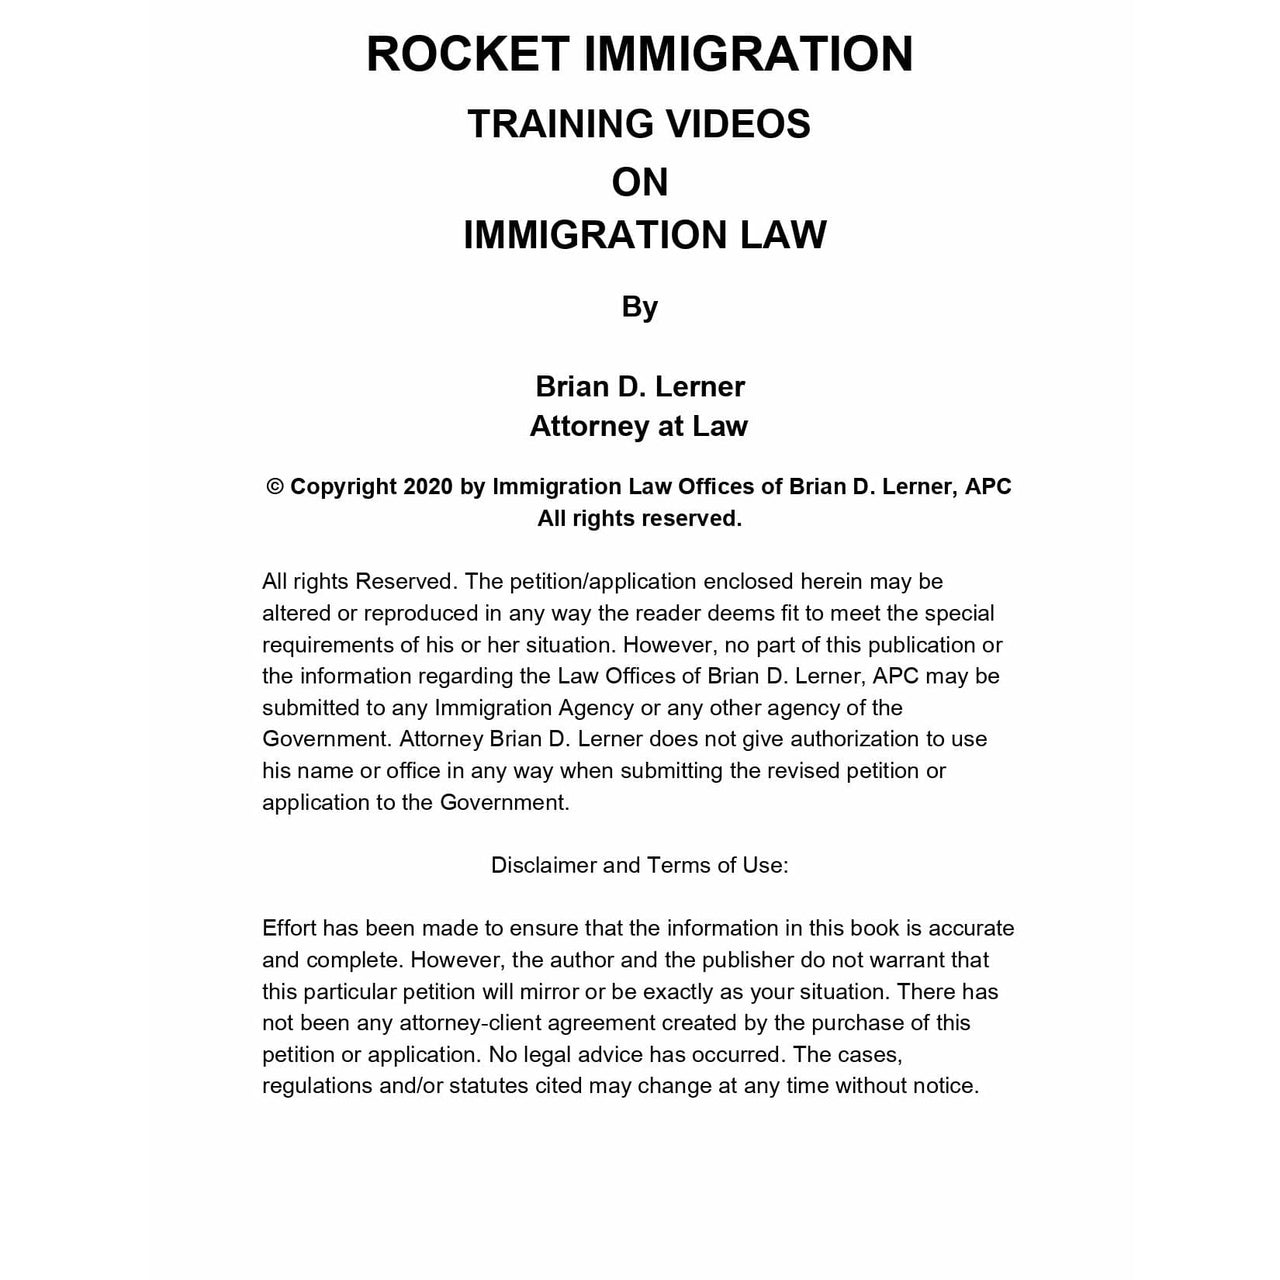 Business Waiver Training Course Access Packet - Rocket Immigration Petitions